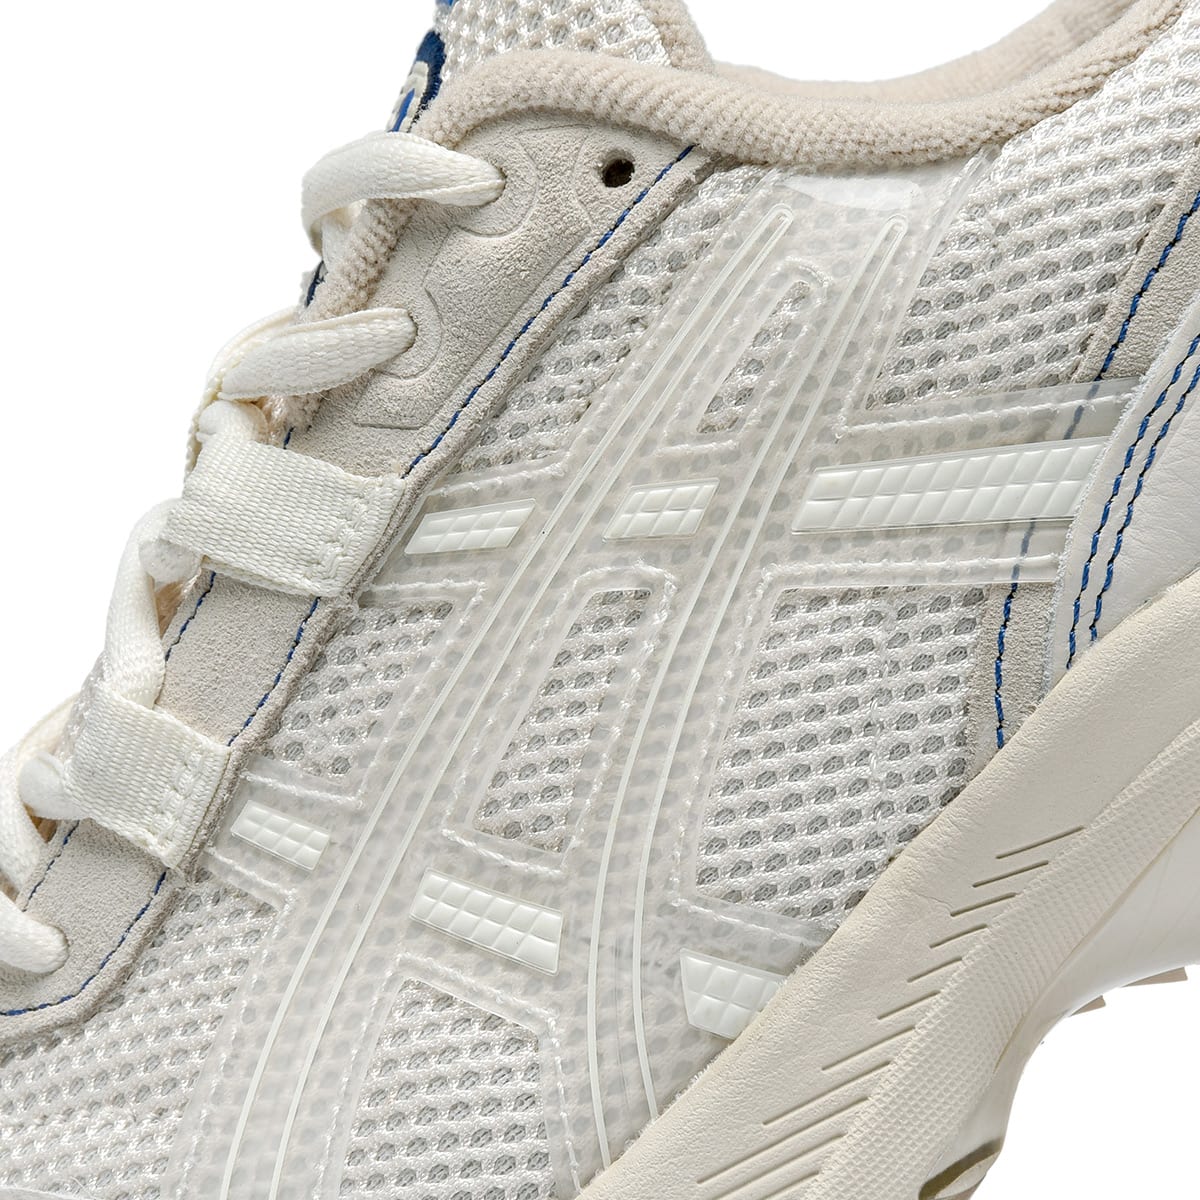 Asics x Above The Clouds Gel-1090 (Birch) | END. Launches